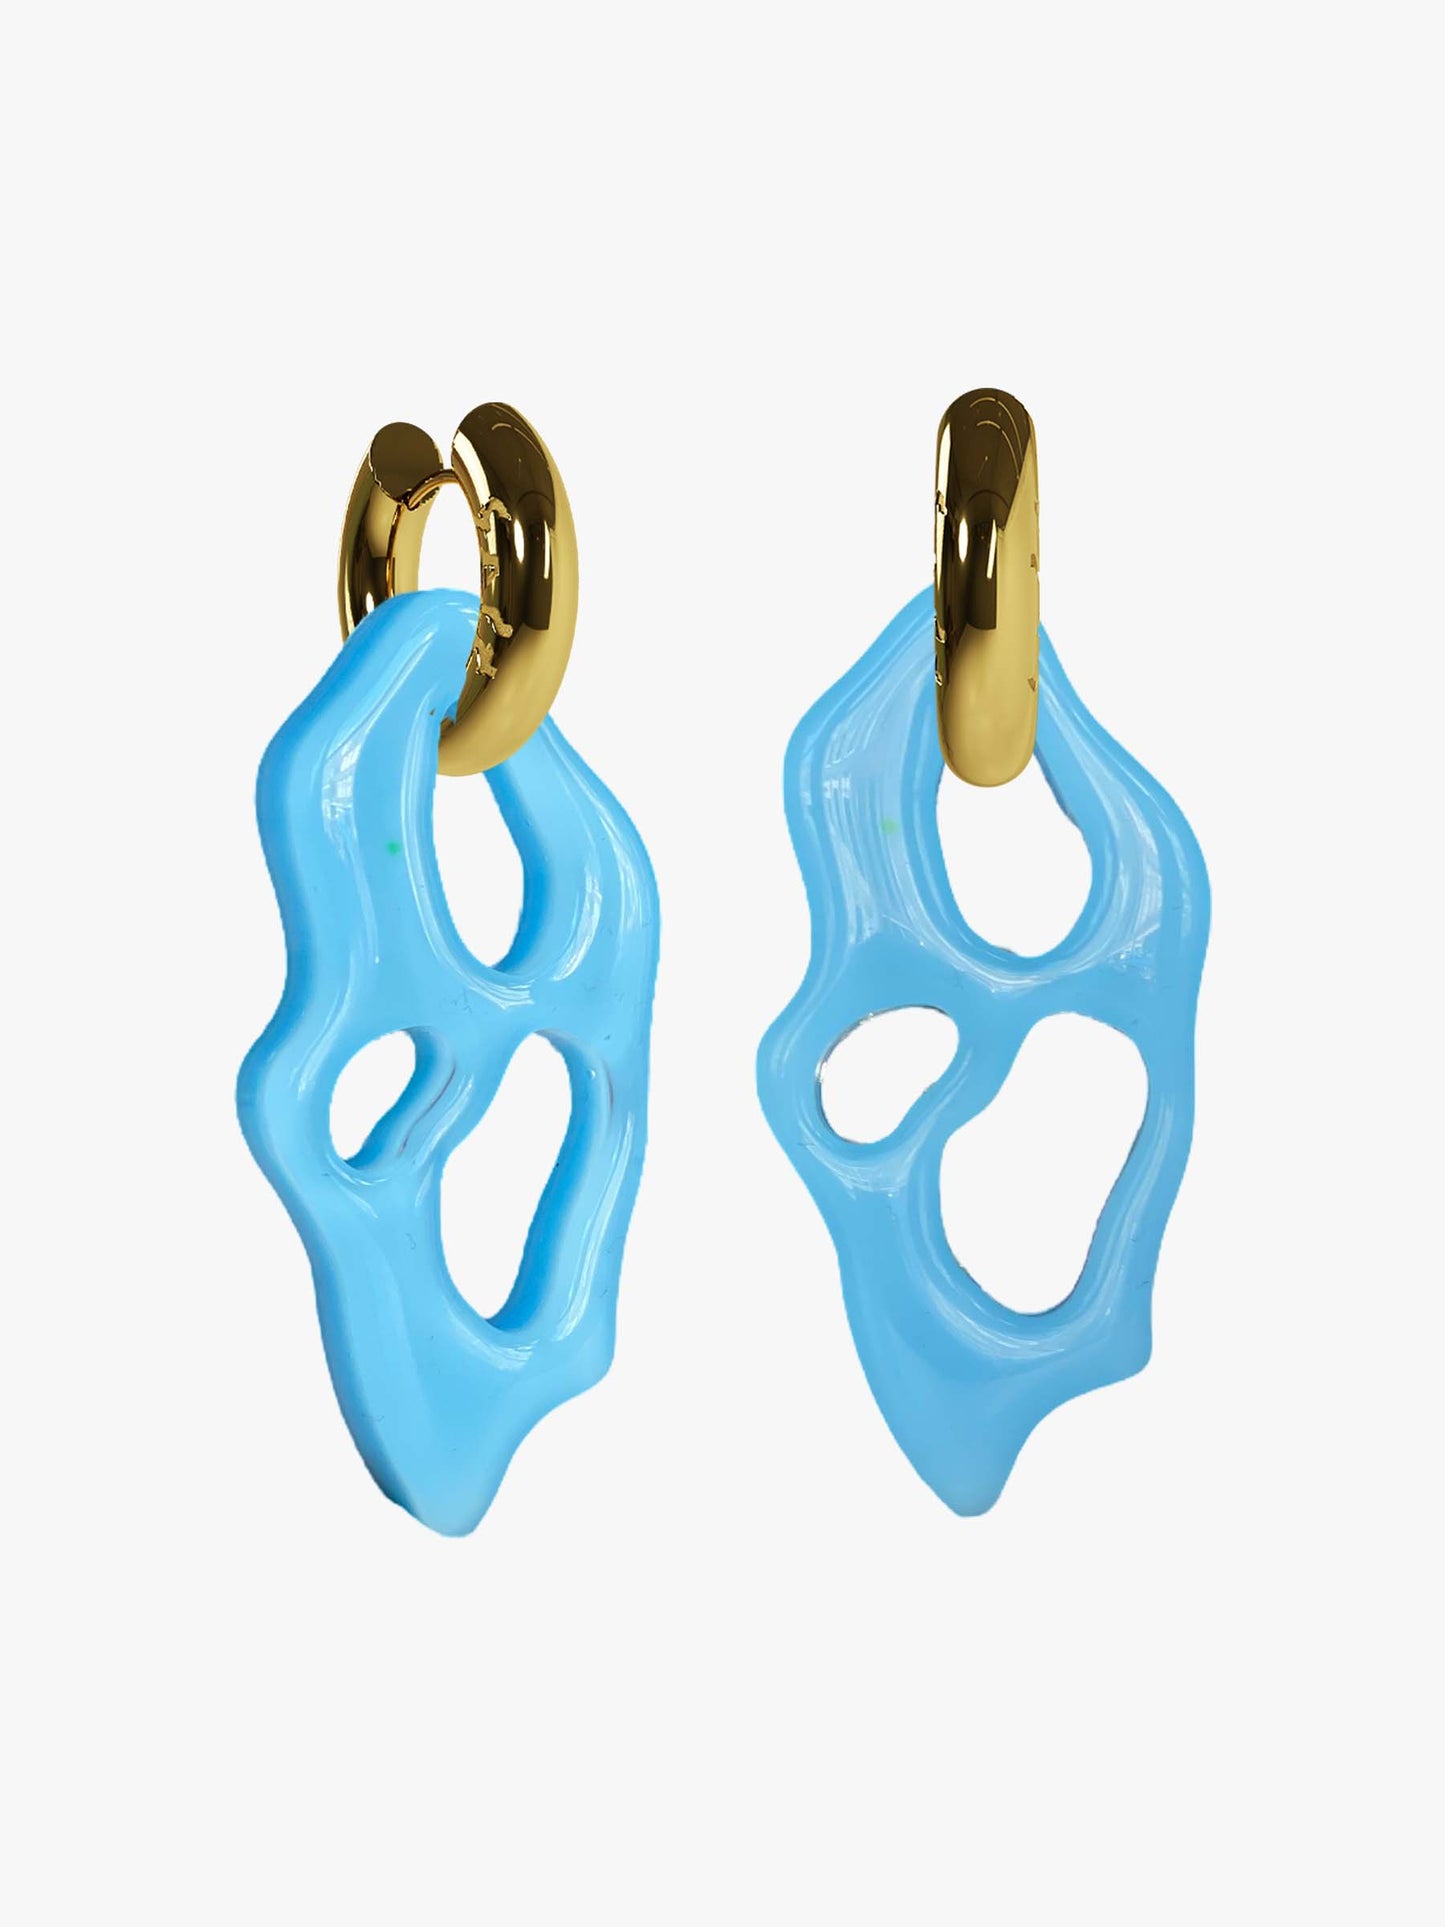 Ami baby blue gold earring (pair)